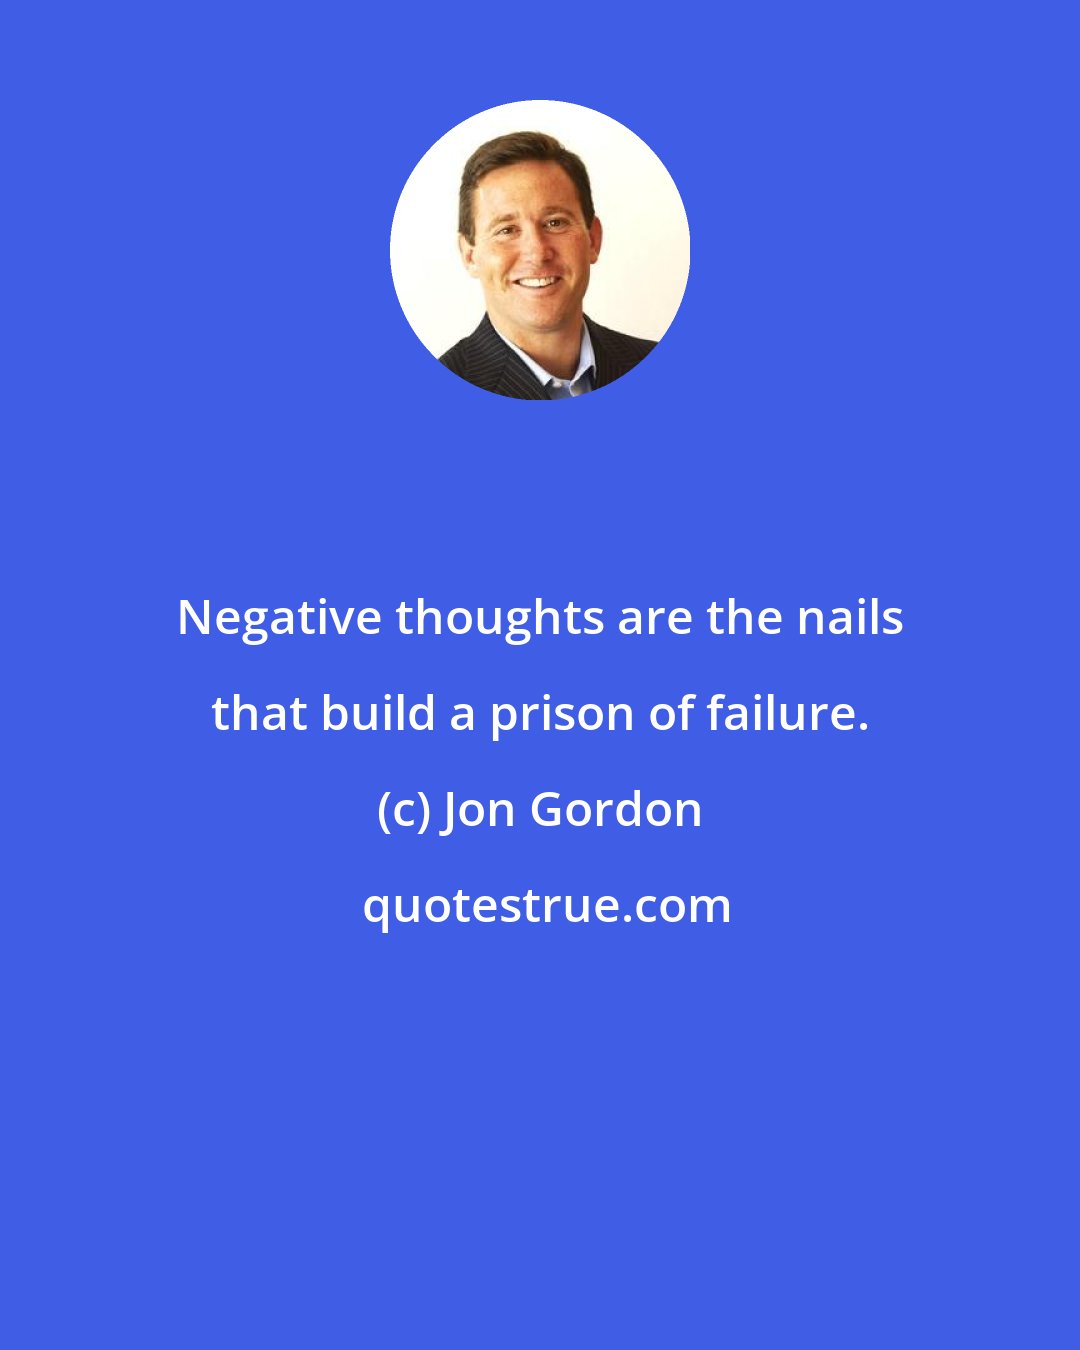 Jon Gordon: Negative thoughts are the nails that build a prison of failure.